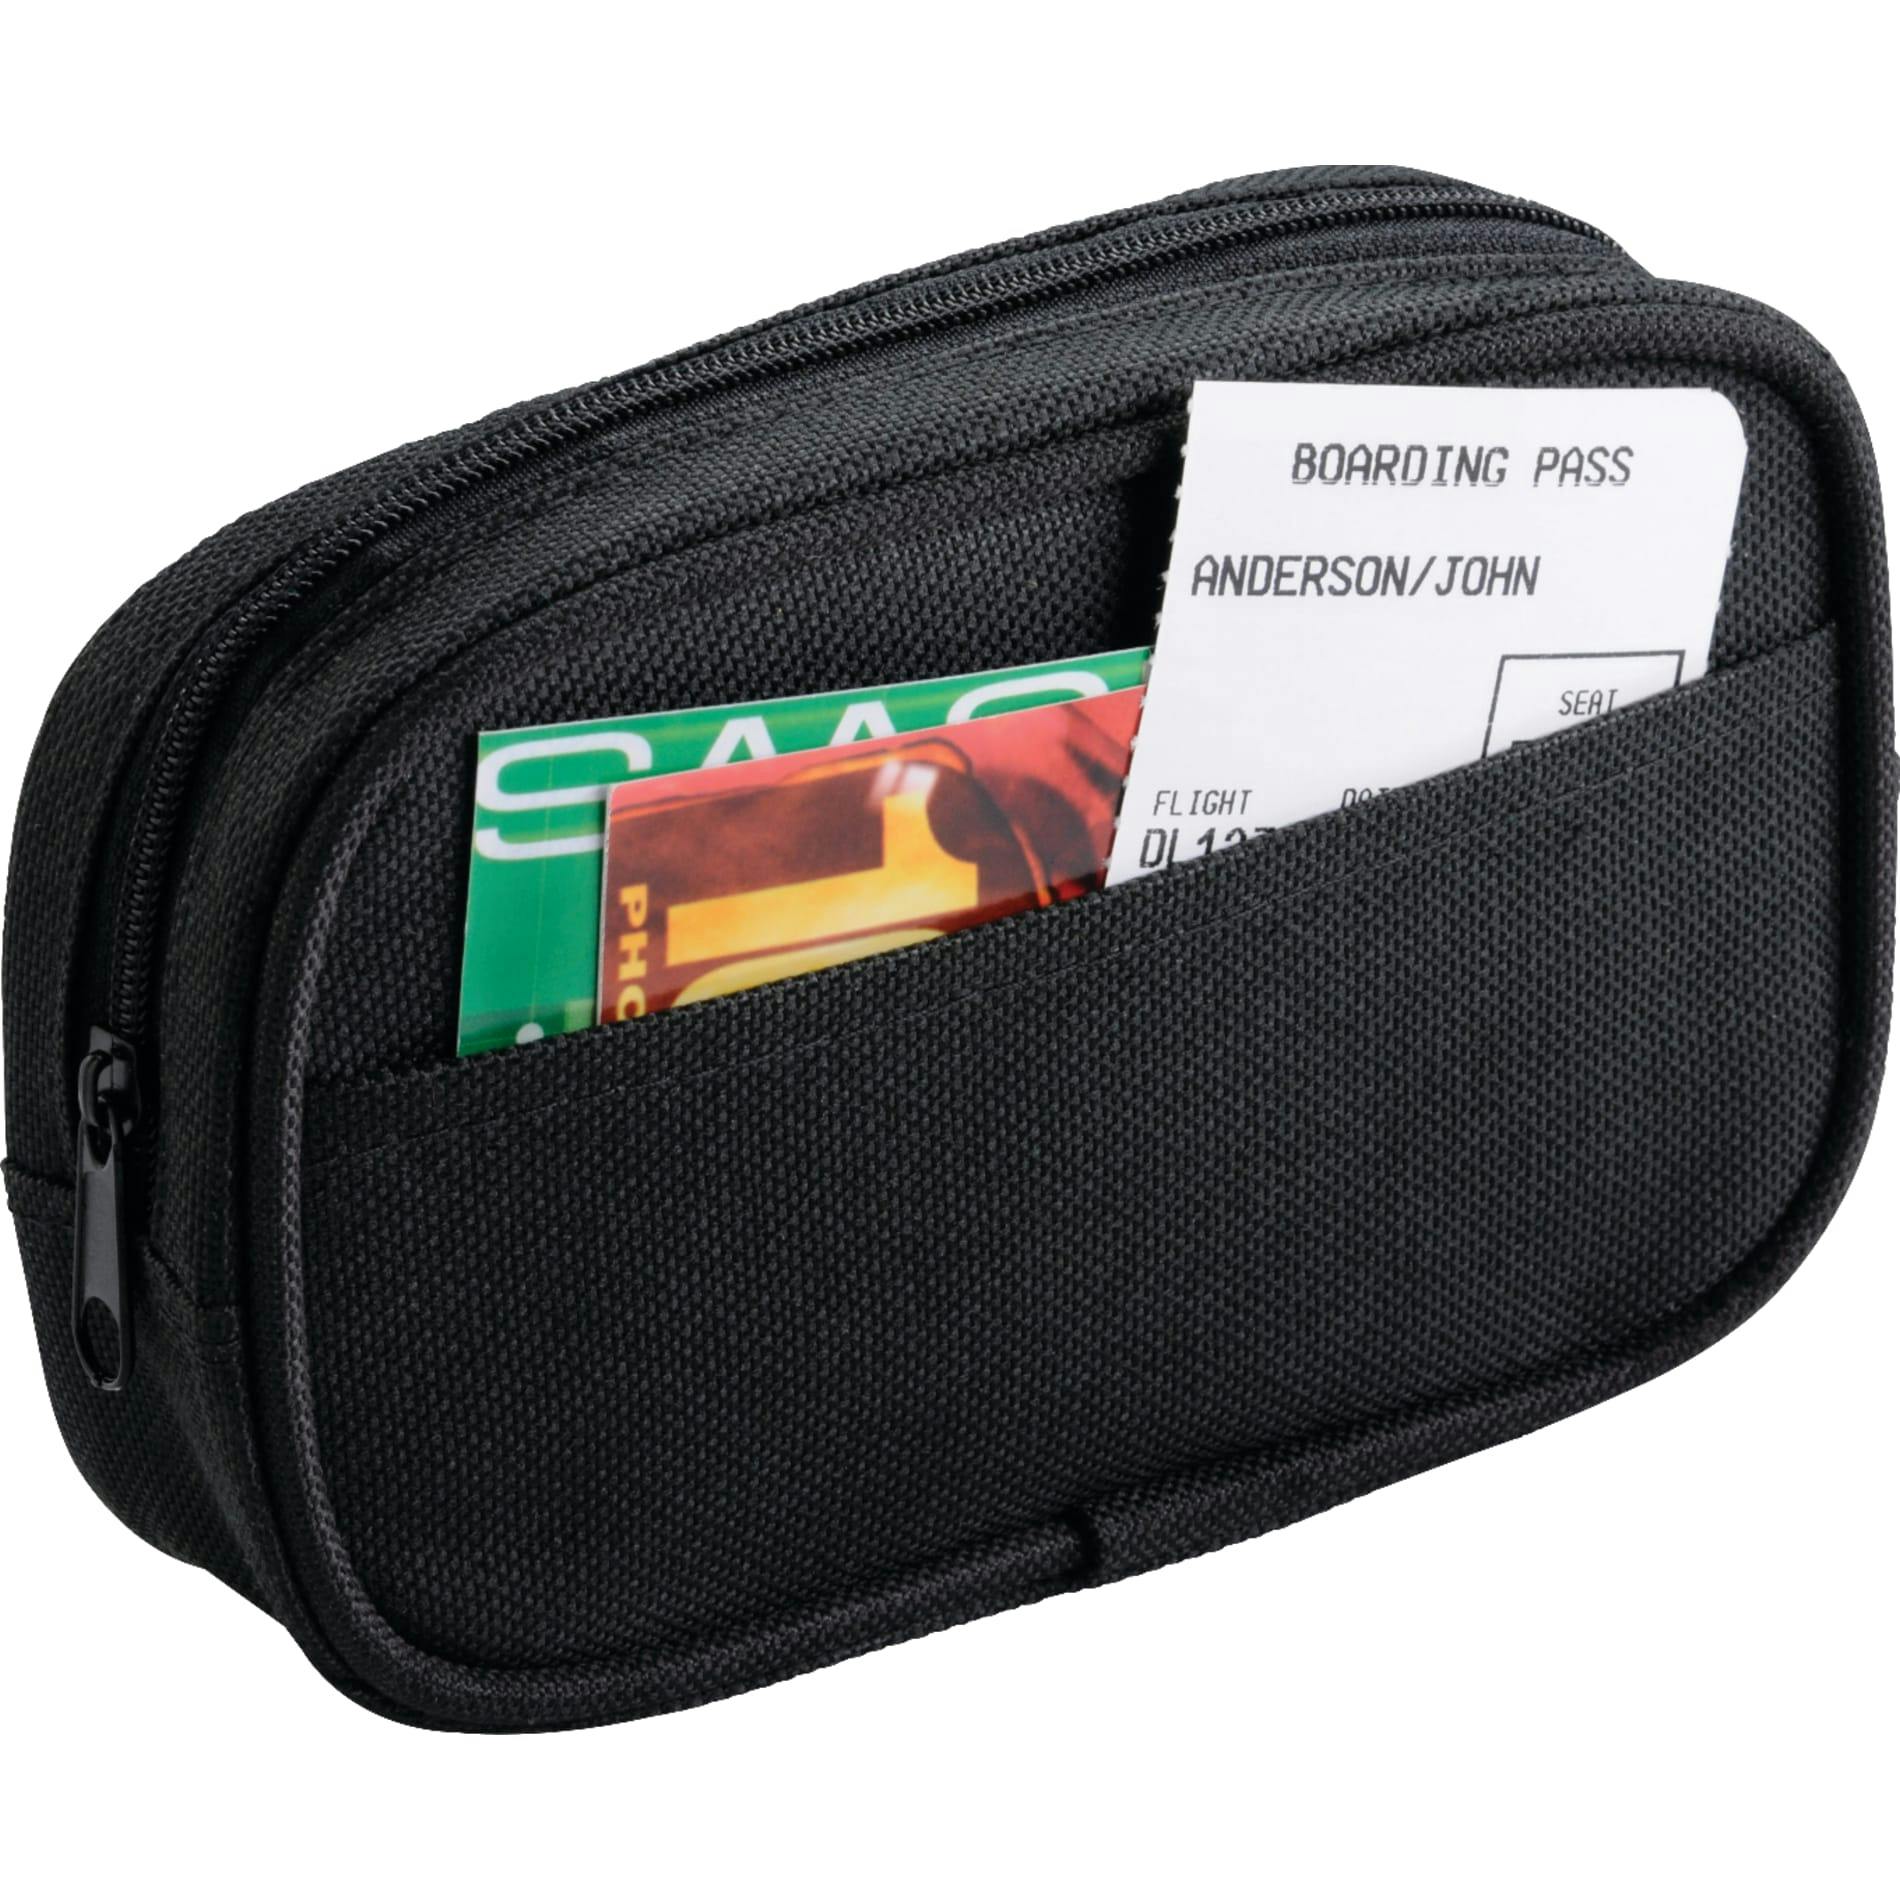 Personal Comfort Travel Kit - additional Image 2